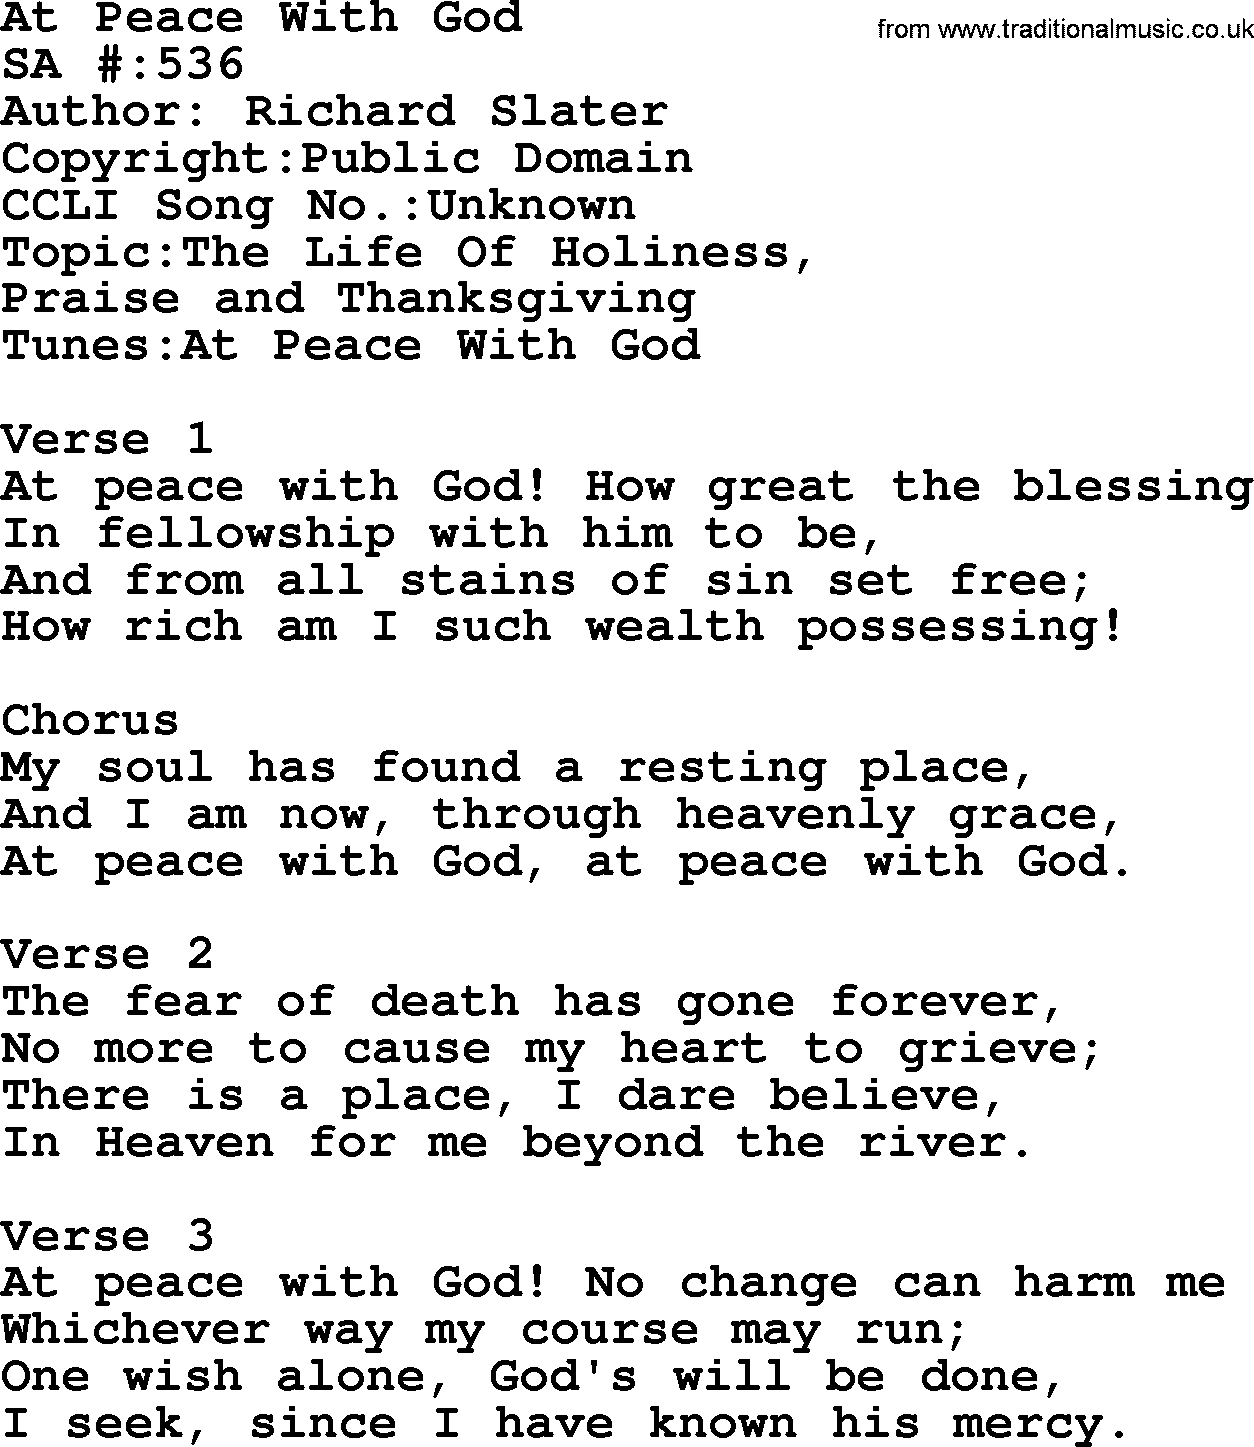 Salvation Army Hymnal, title: At Peace With God, with lyrics and PDF,